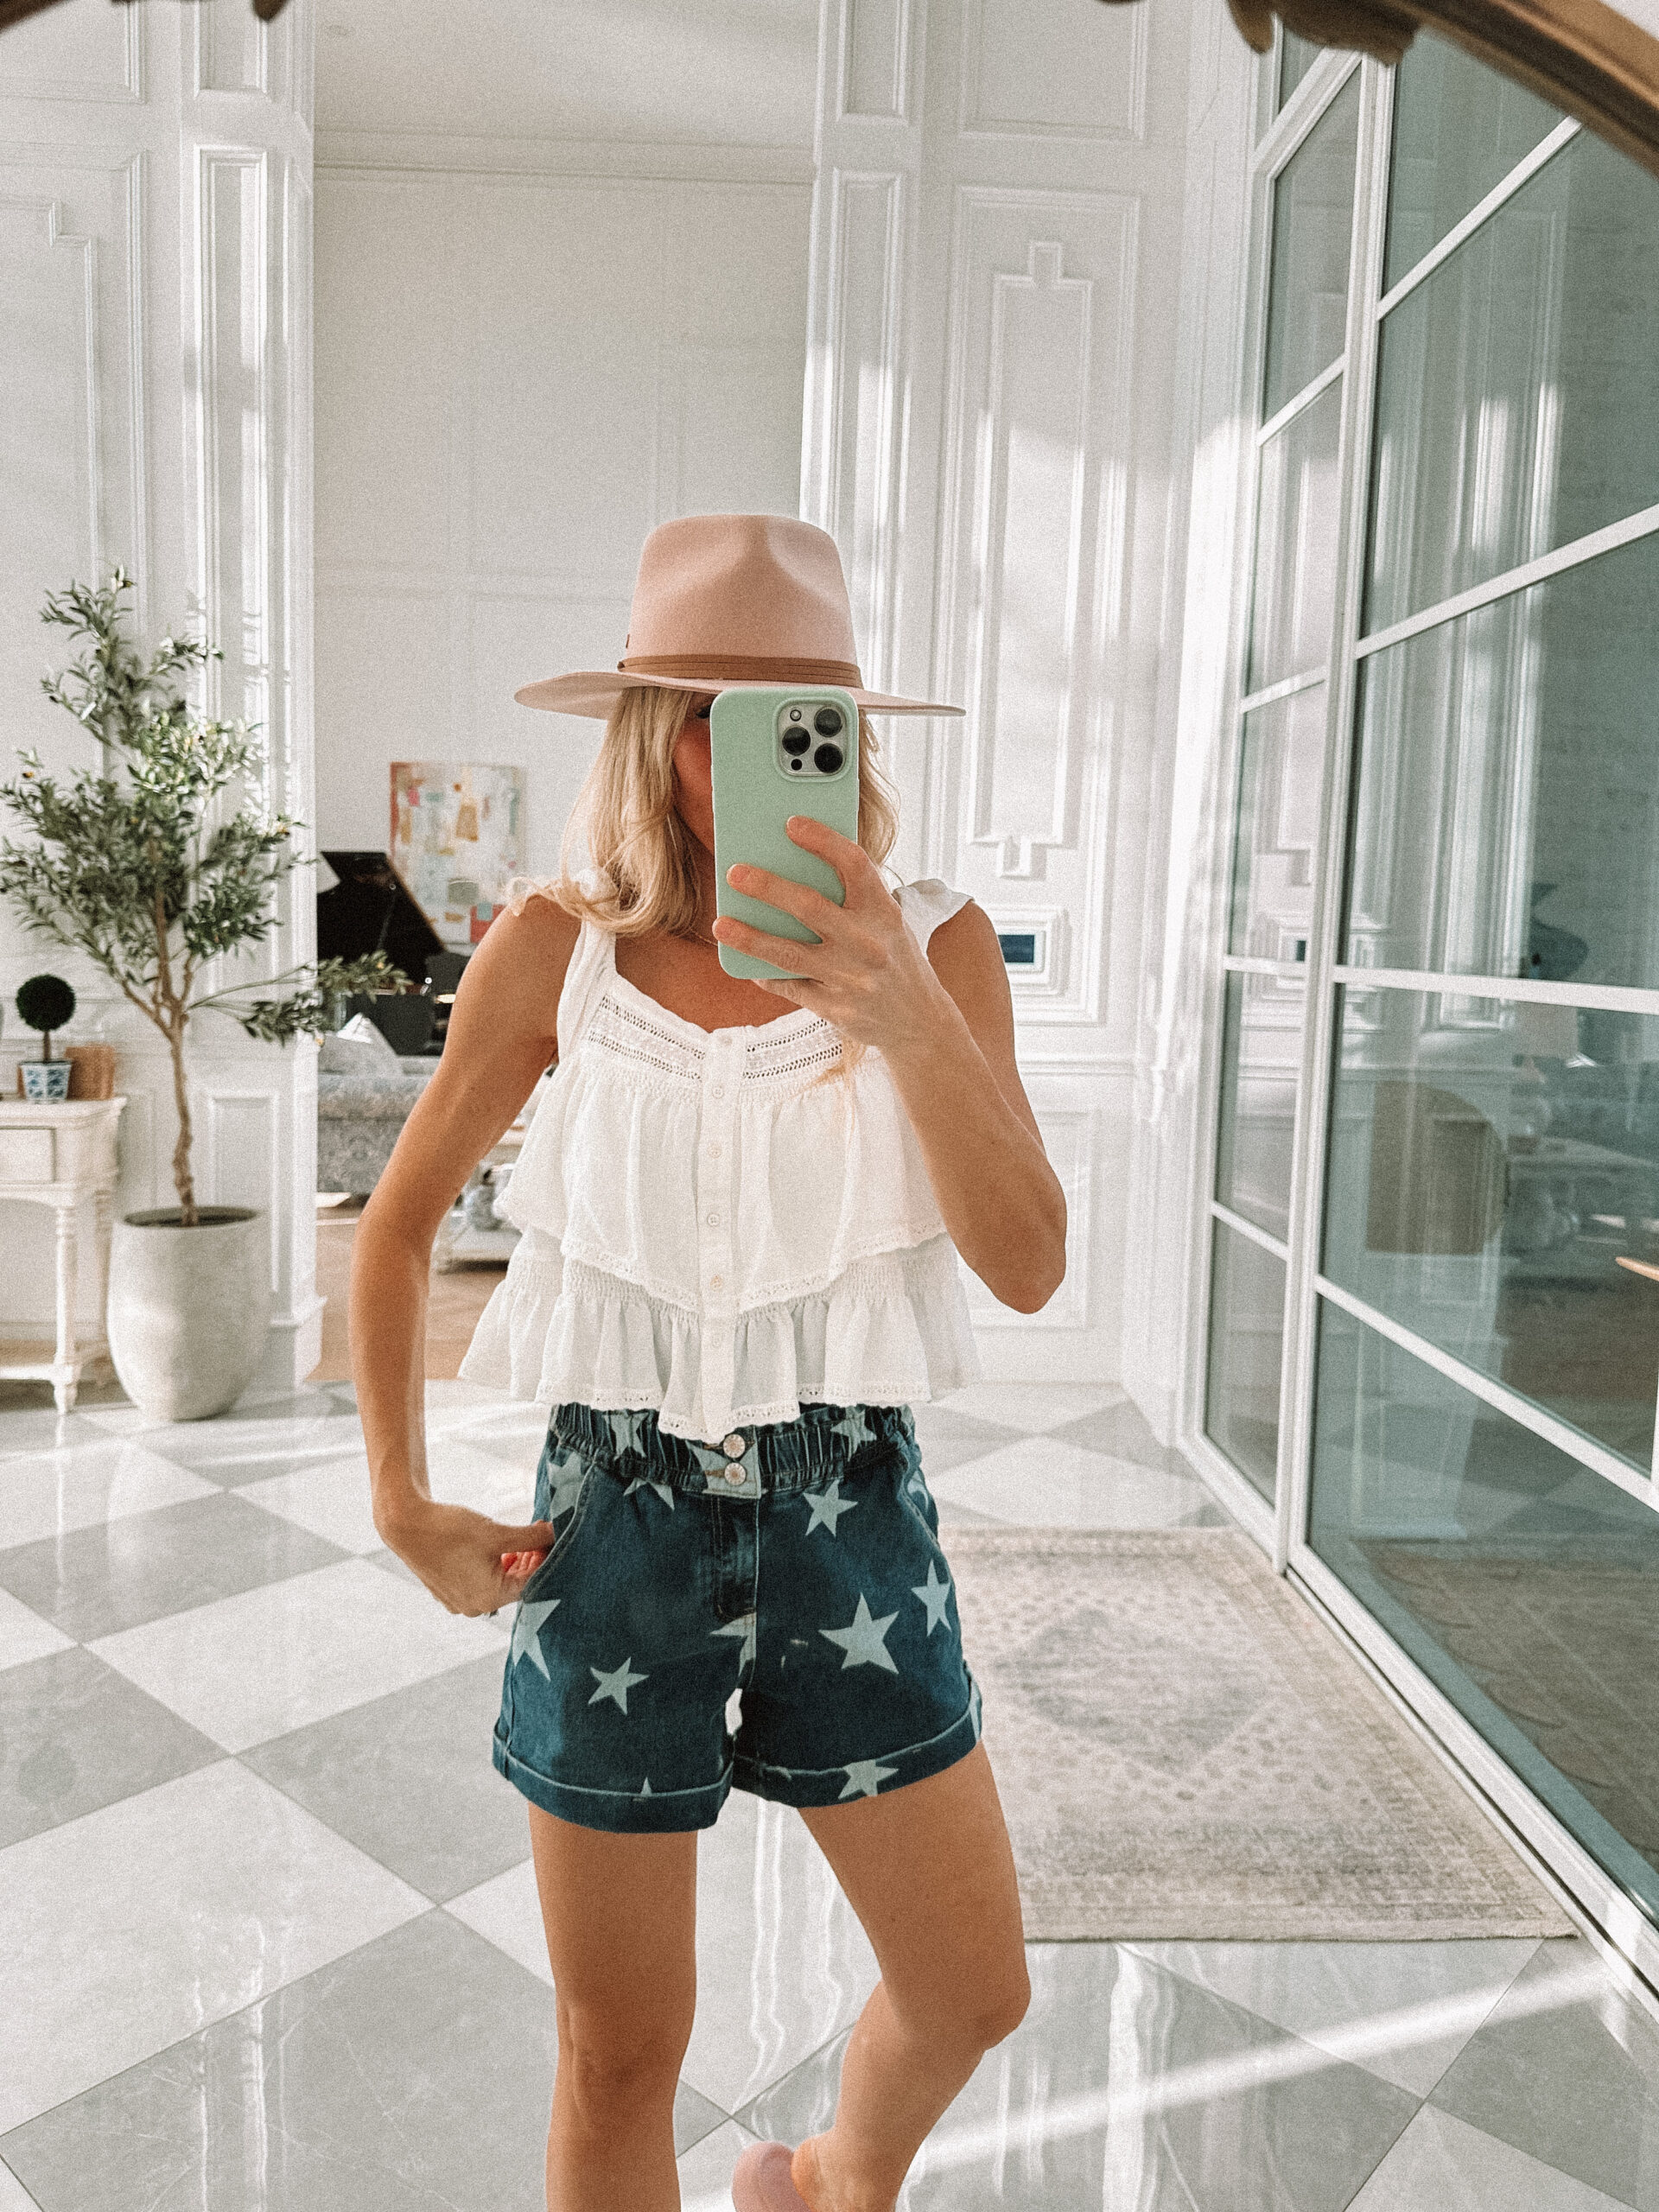 Holiday Accessories Casual Summer Look Women's Shorts Chic Bag Fashionable Accessories 4th of July Celebration Outfit